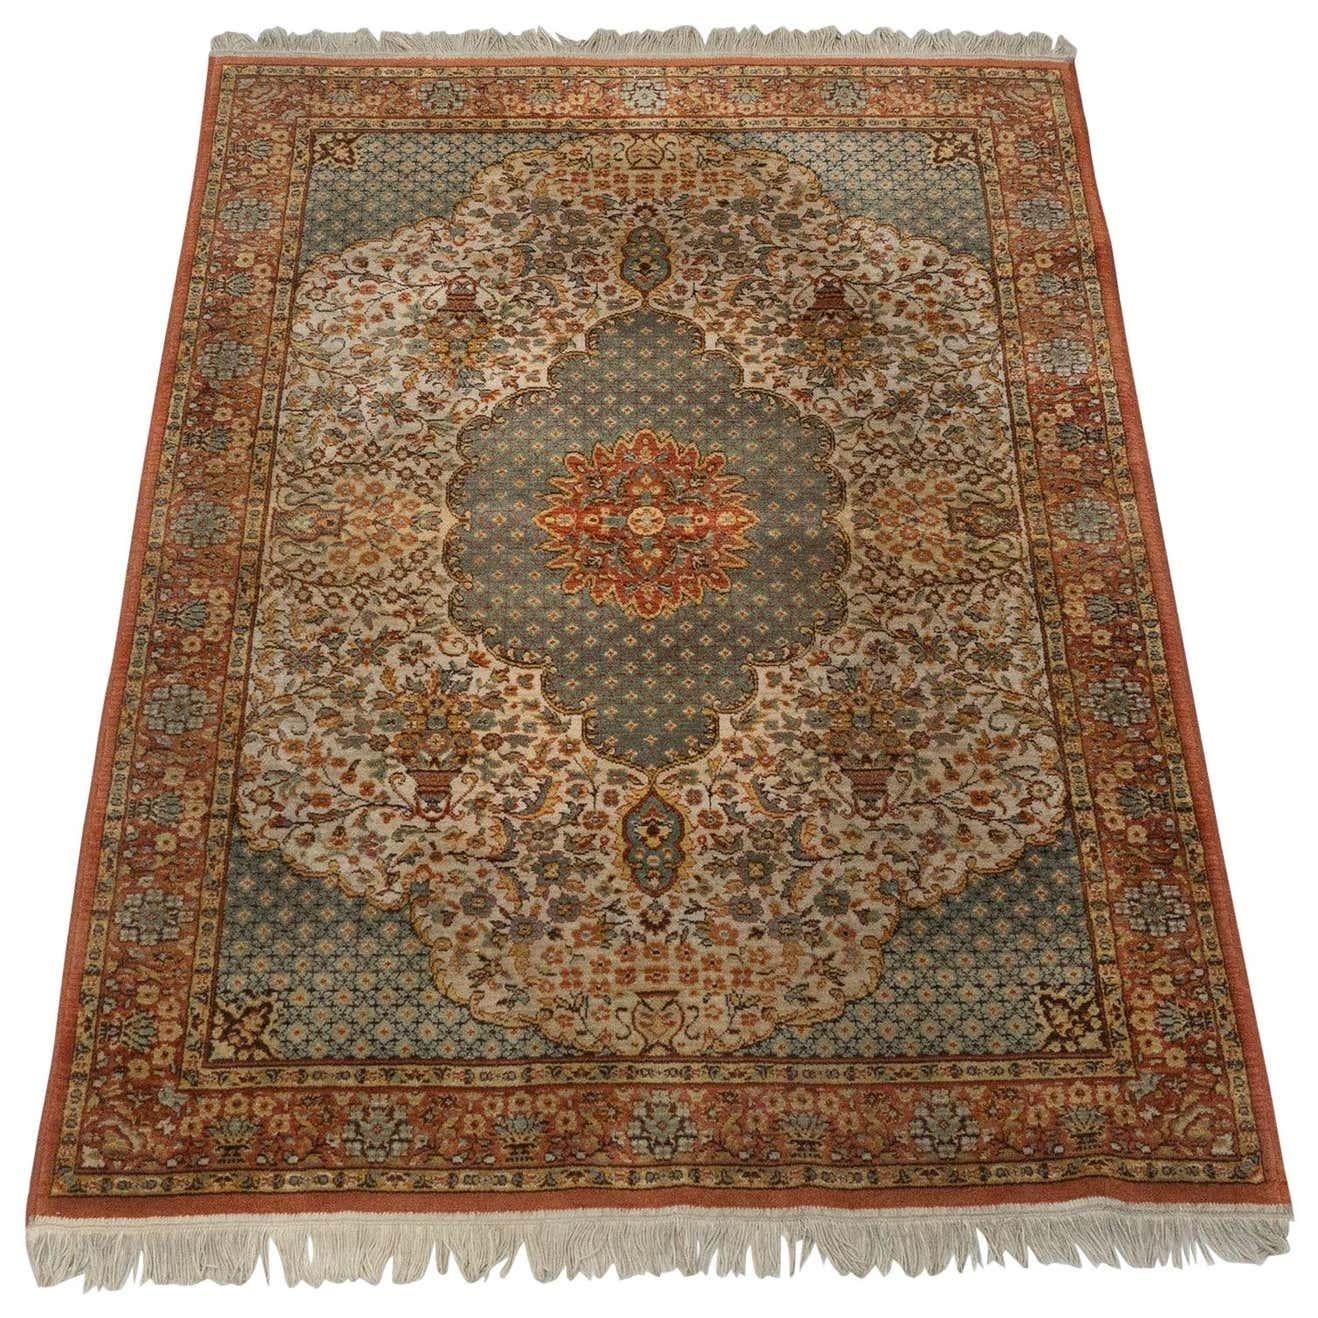 Wool rug by unknown manufacturer from Spain, circa 1940.

In original condition, with minor wear consistent with age and use, preserving a beautiful patina.

Material:
Wool

Dimensions:
D 0.8 cm x W 130 cm x H 200 cm.